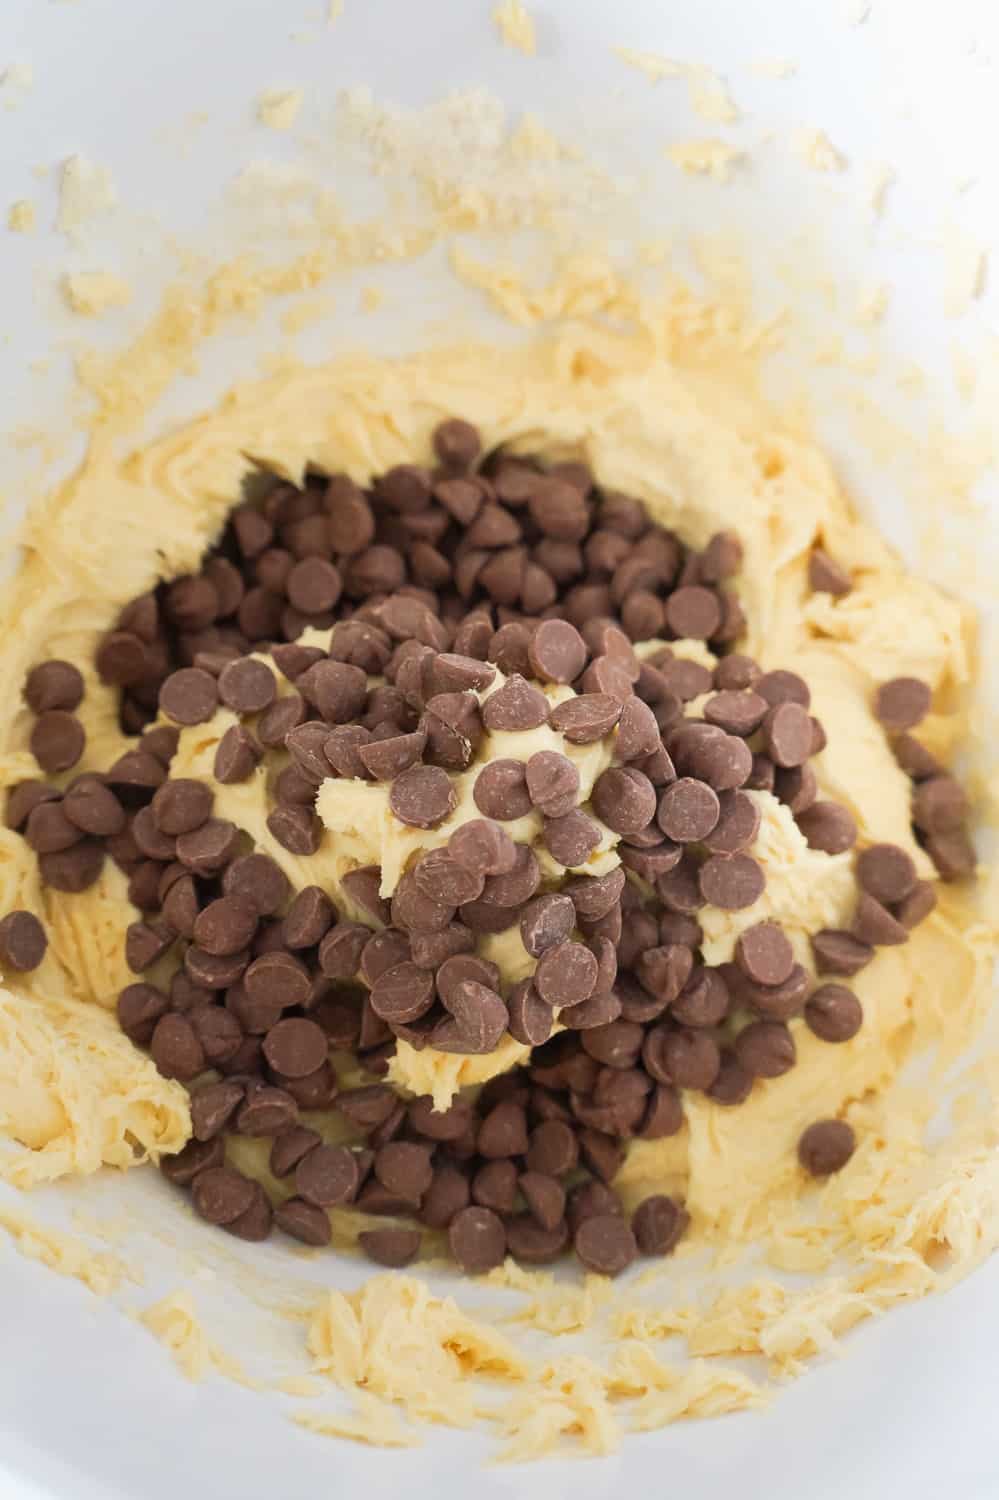 milk chocolate chips dumped on top of cake mix cookie dough in a mixing bowl